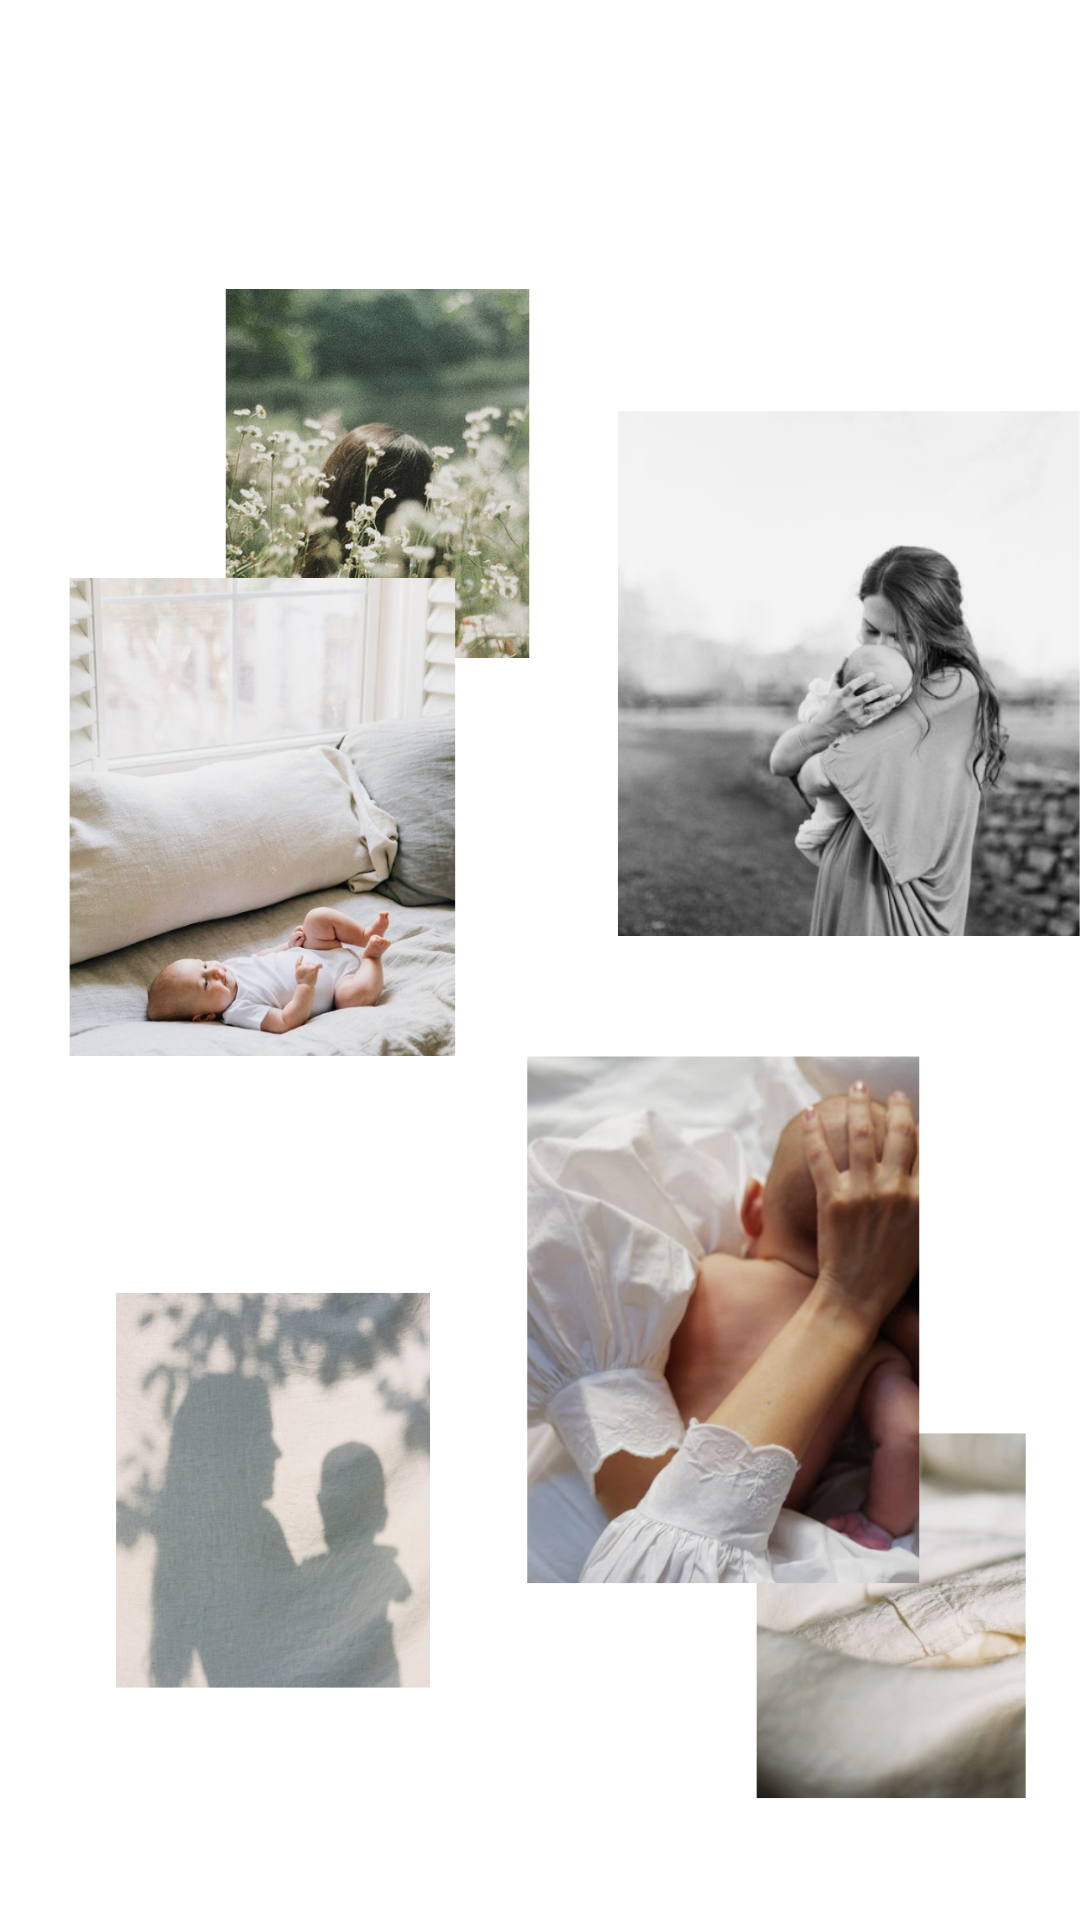 Vision board with inspiration images depicting motherhood, babies, and outdoor scenes